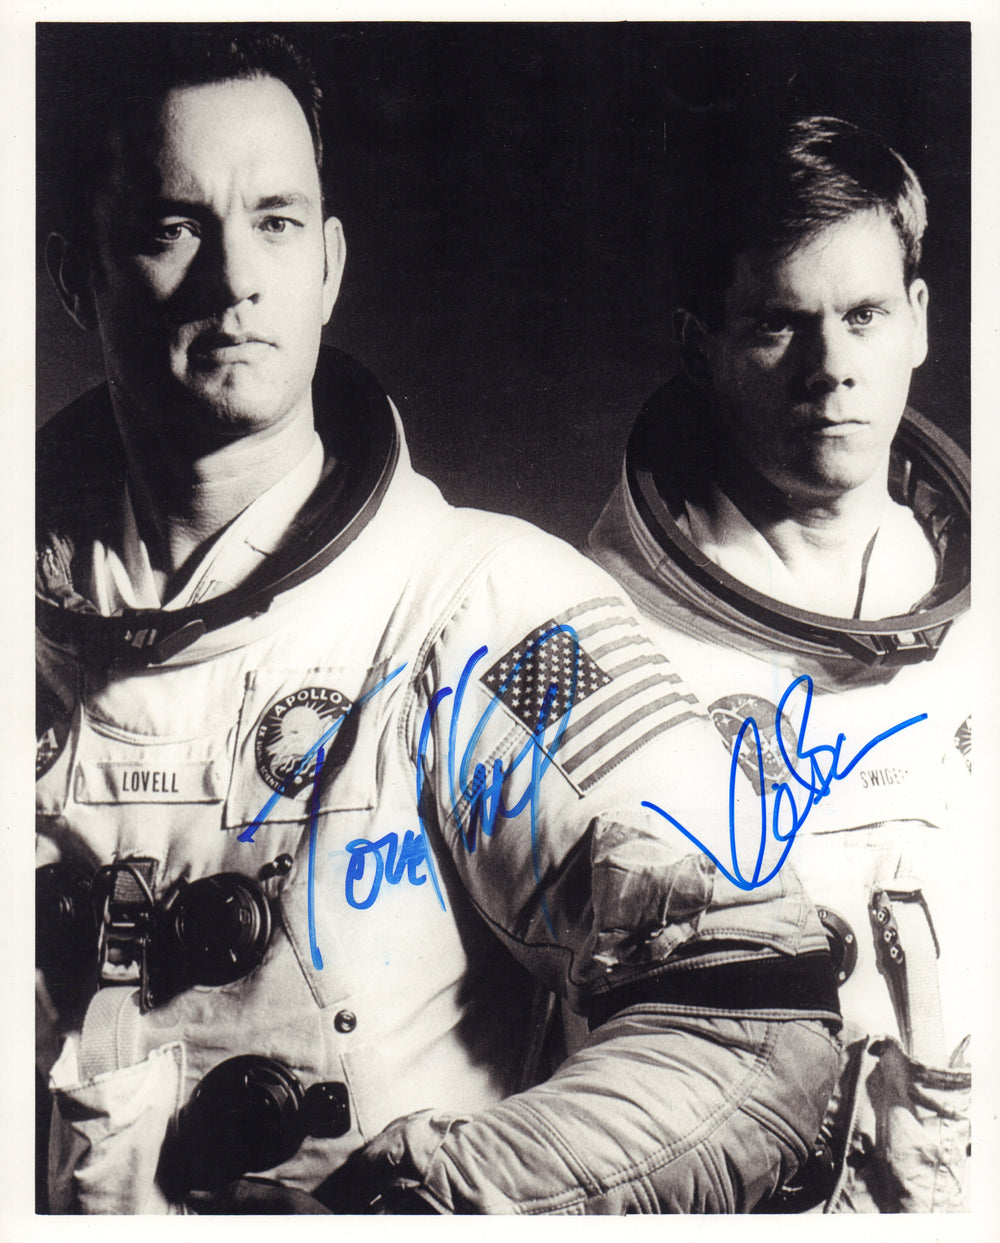 Tom Hanks & Kevin Bacon in Apollo 13 Signed 8x10 Photo